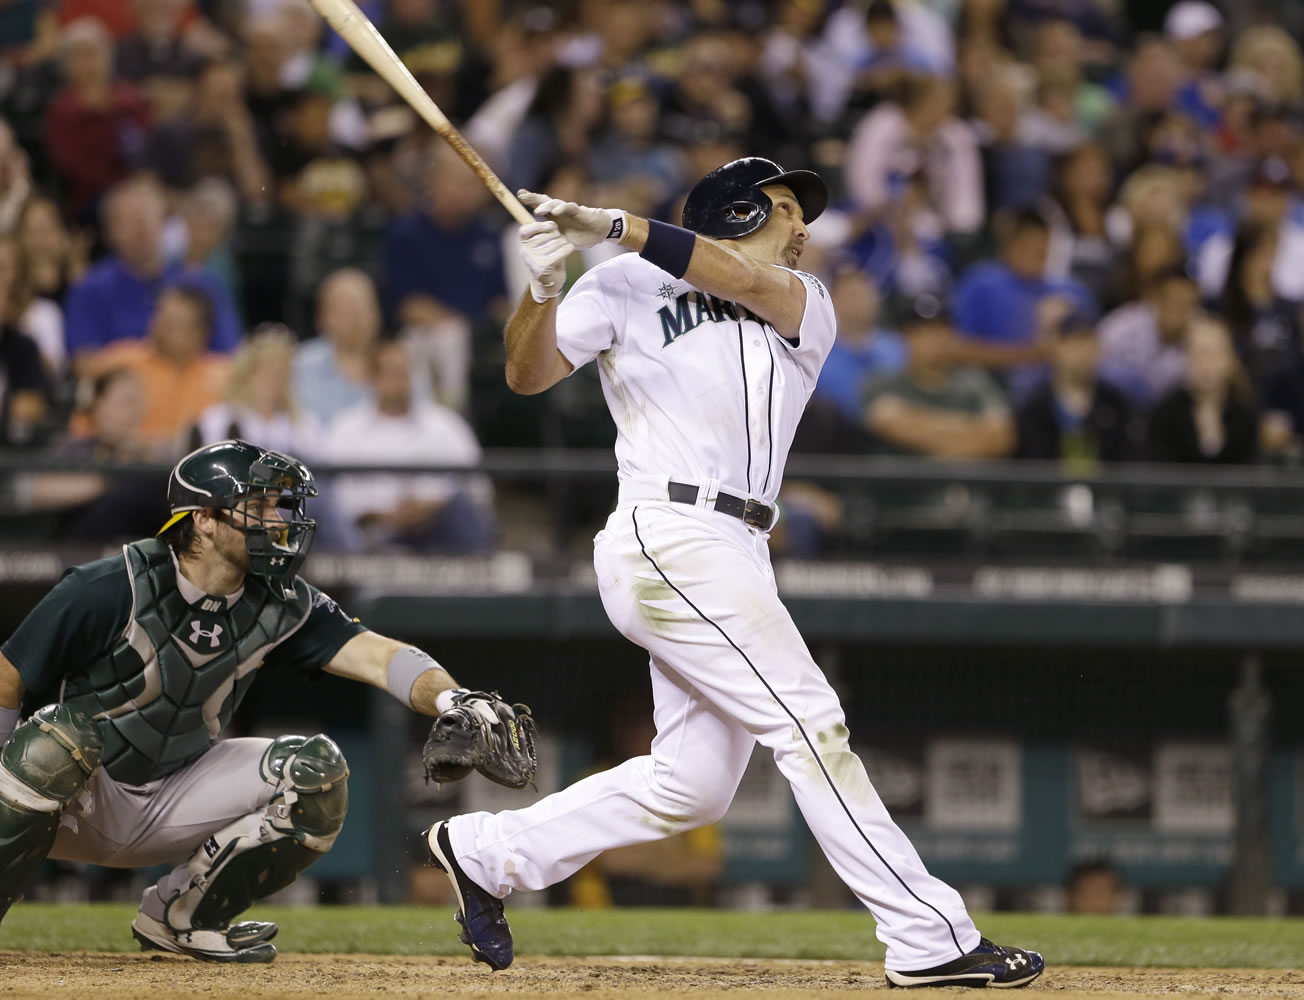 Seattle Mariners' Raul Ibanez homers in the seventh inning Saturday against the Oakland Athletics.